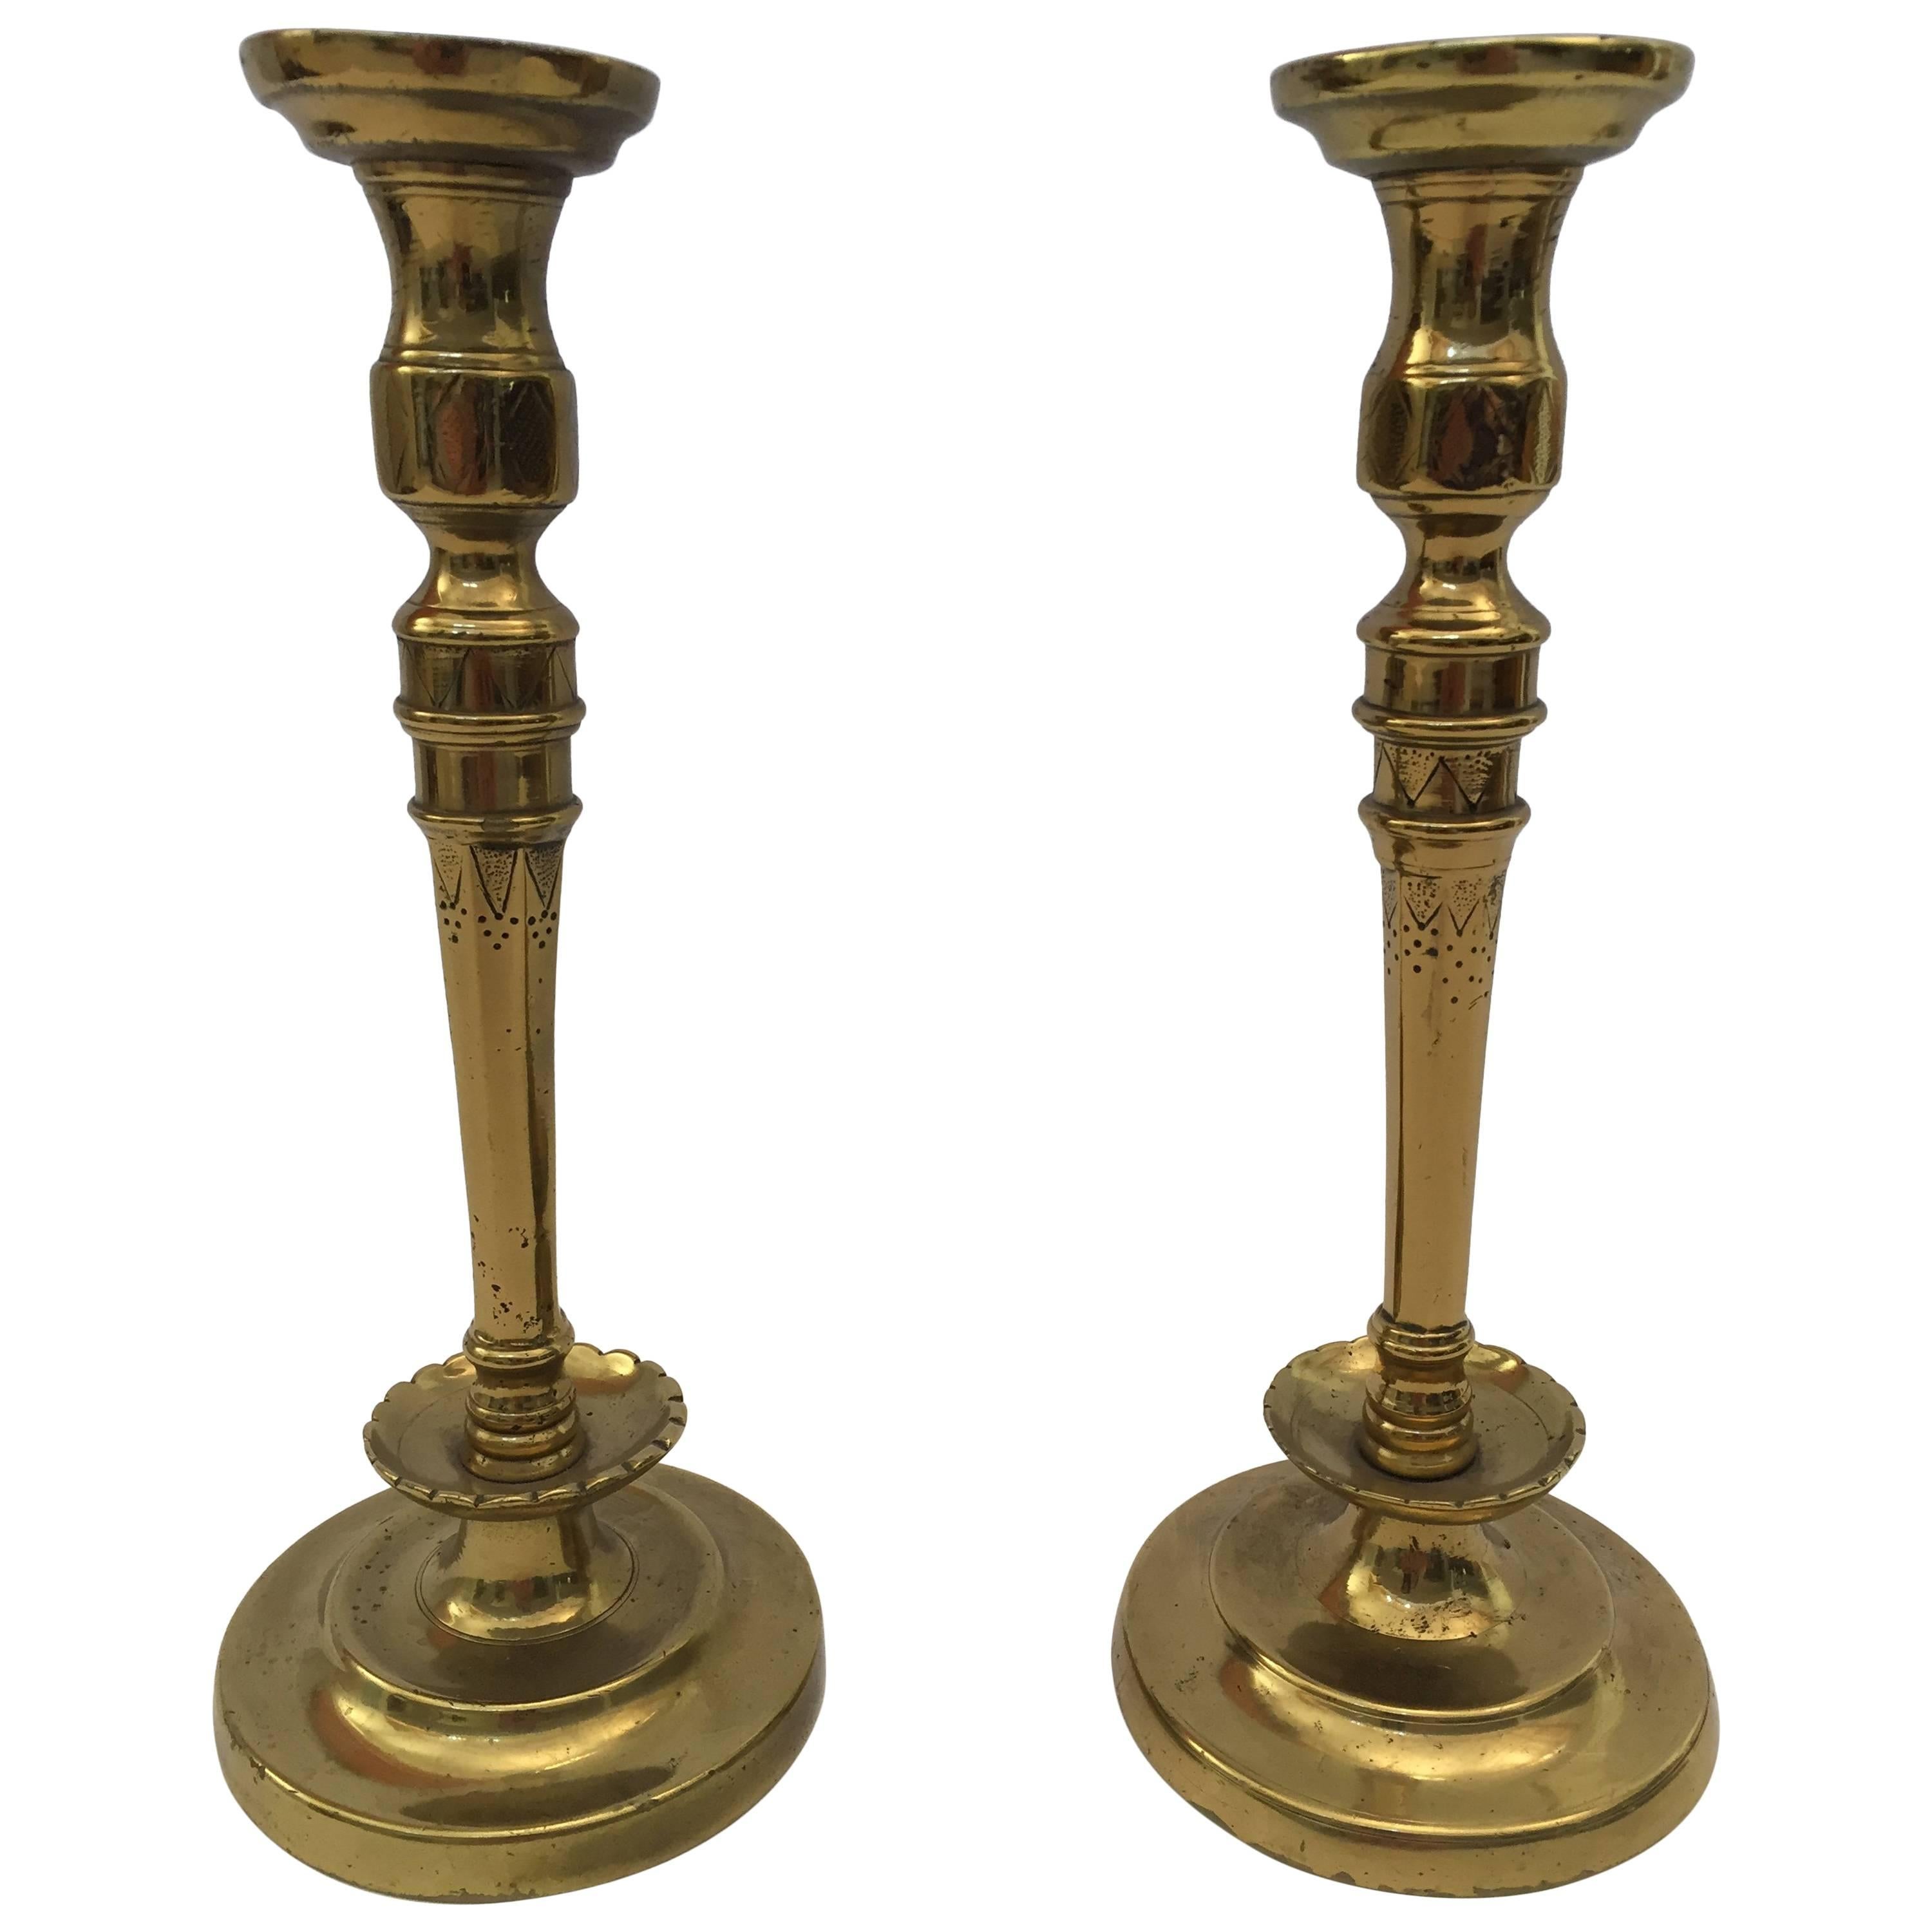 Pair of French 19th C. Hand Tooled Brass Candlesticks